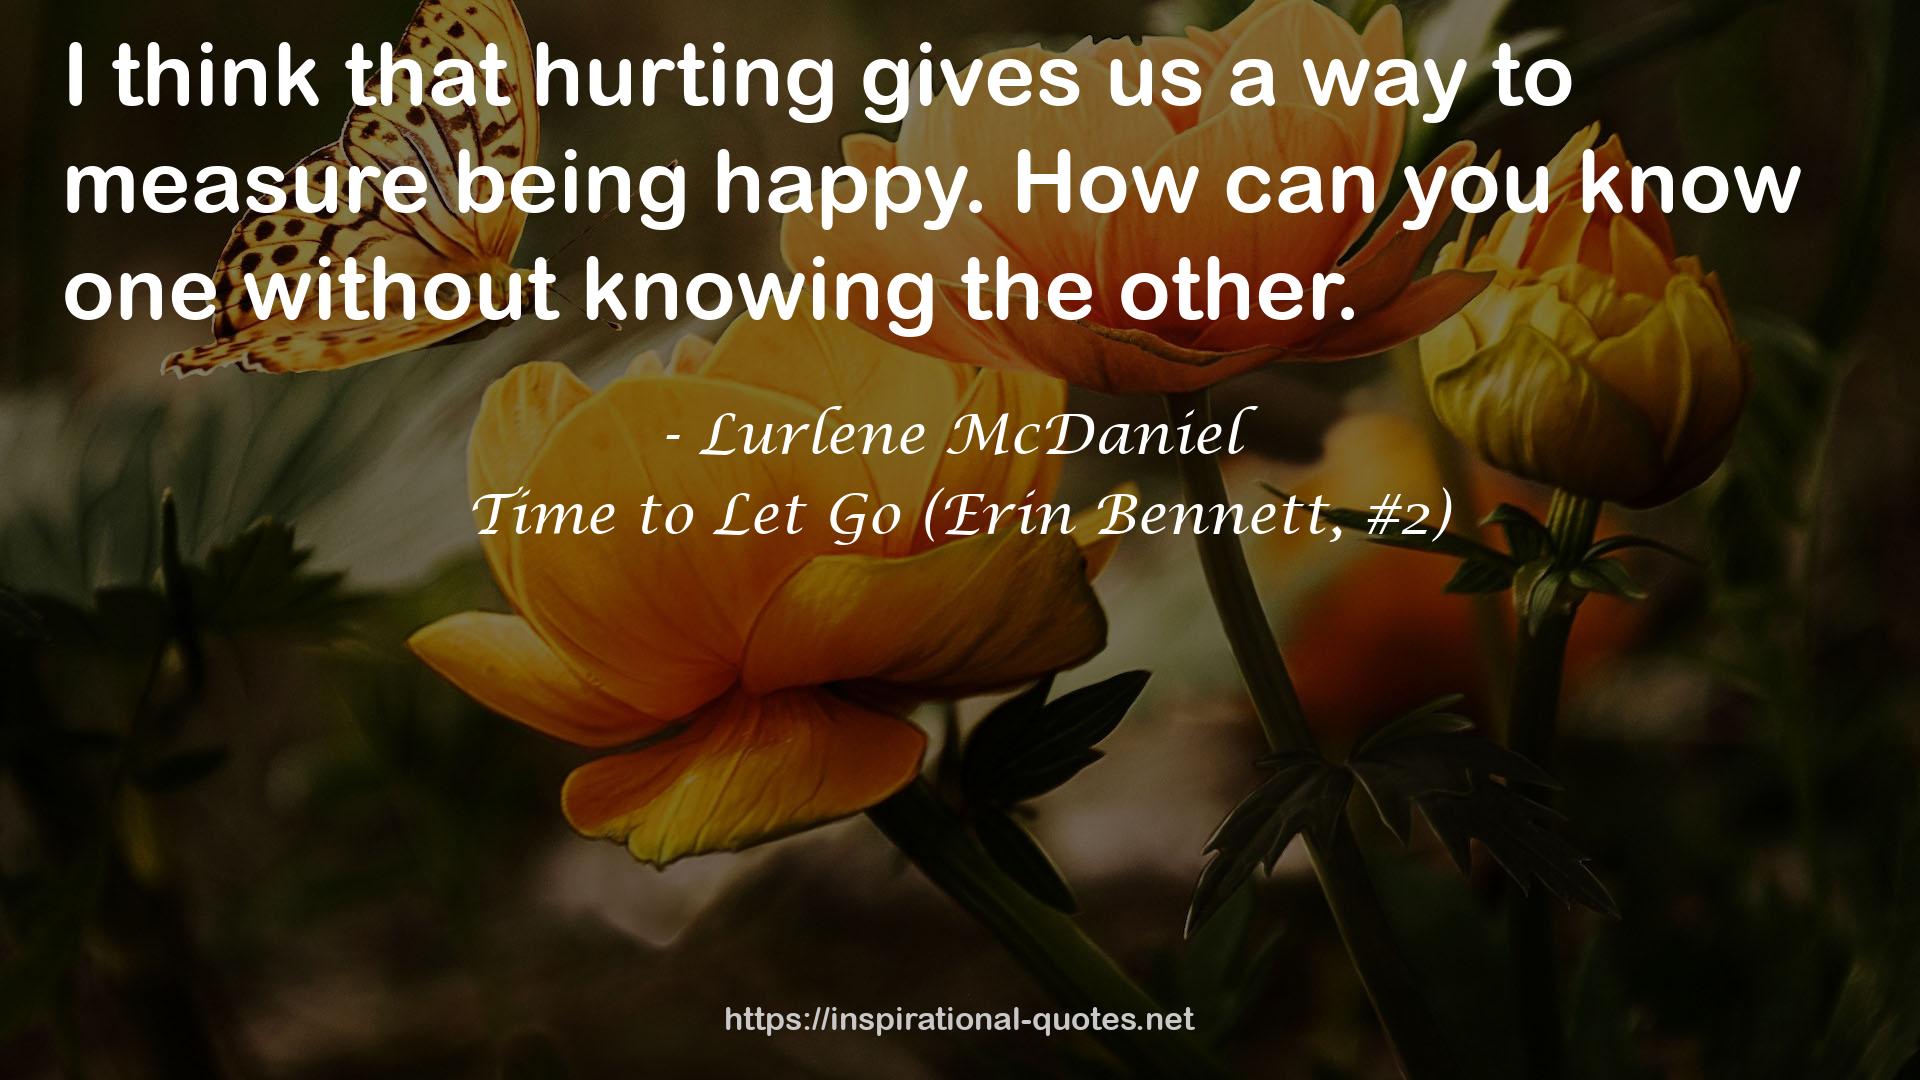 Time to Let Go (Erin Bennett, #2) QUOTES